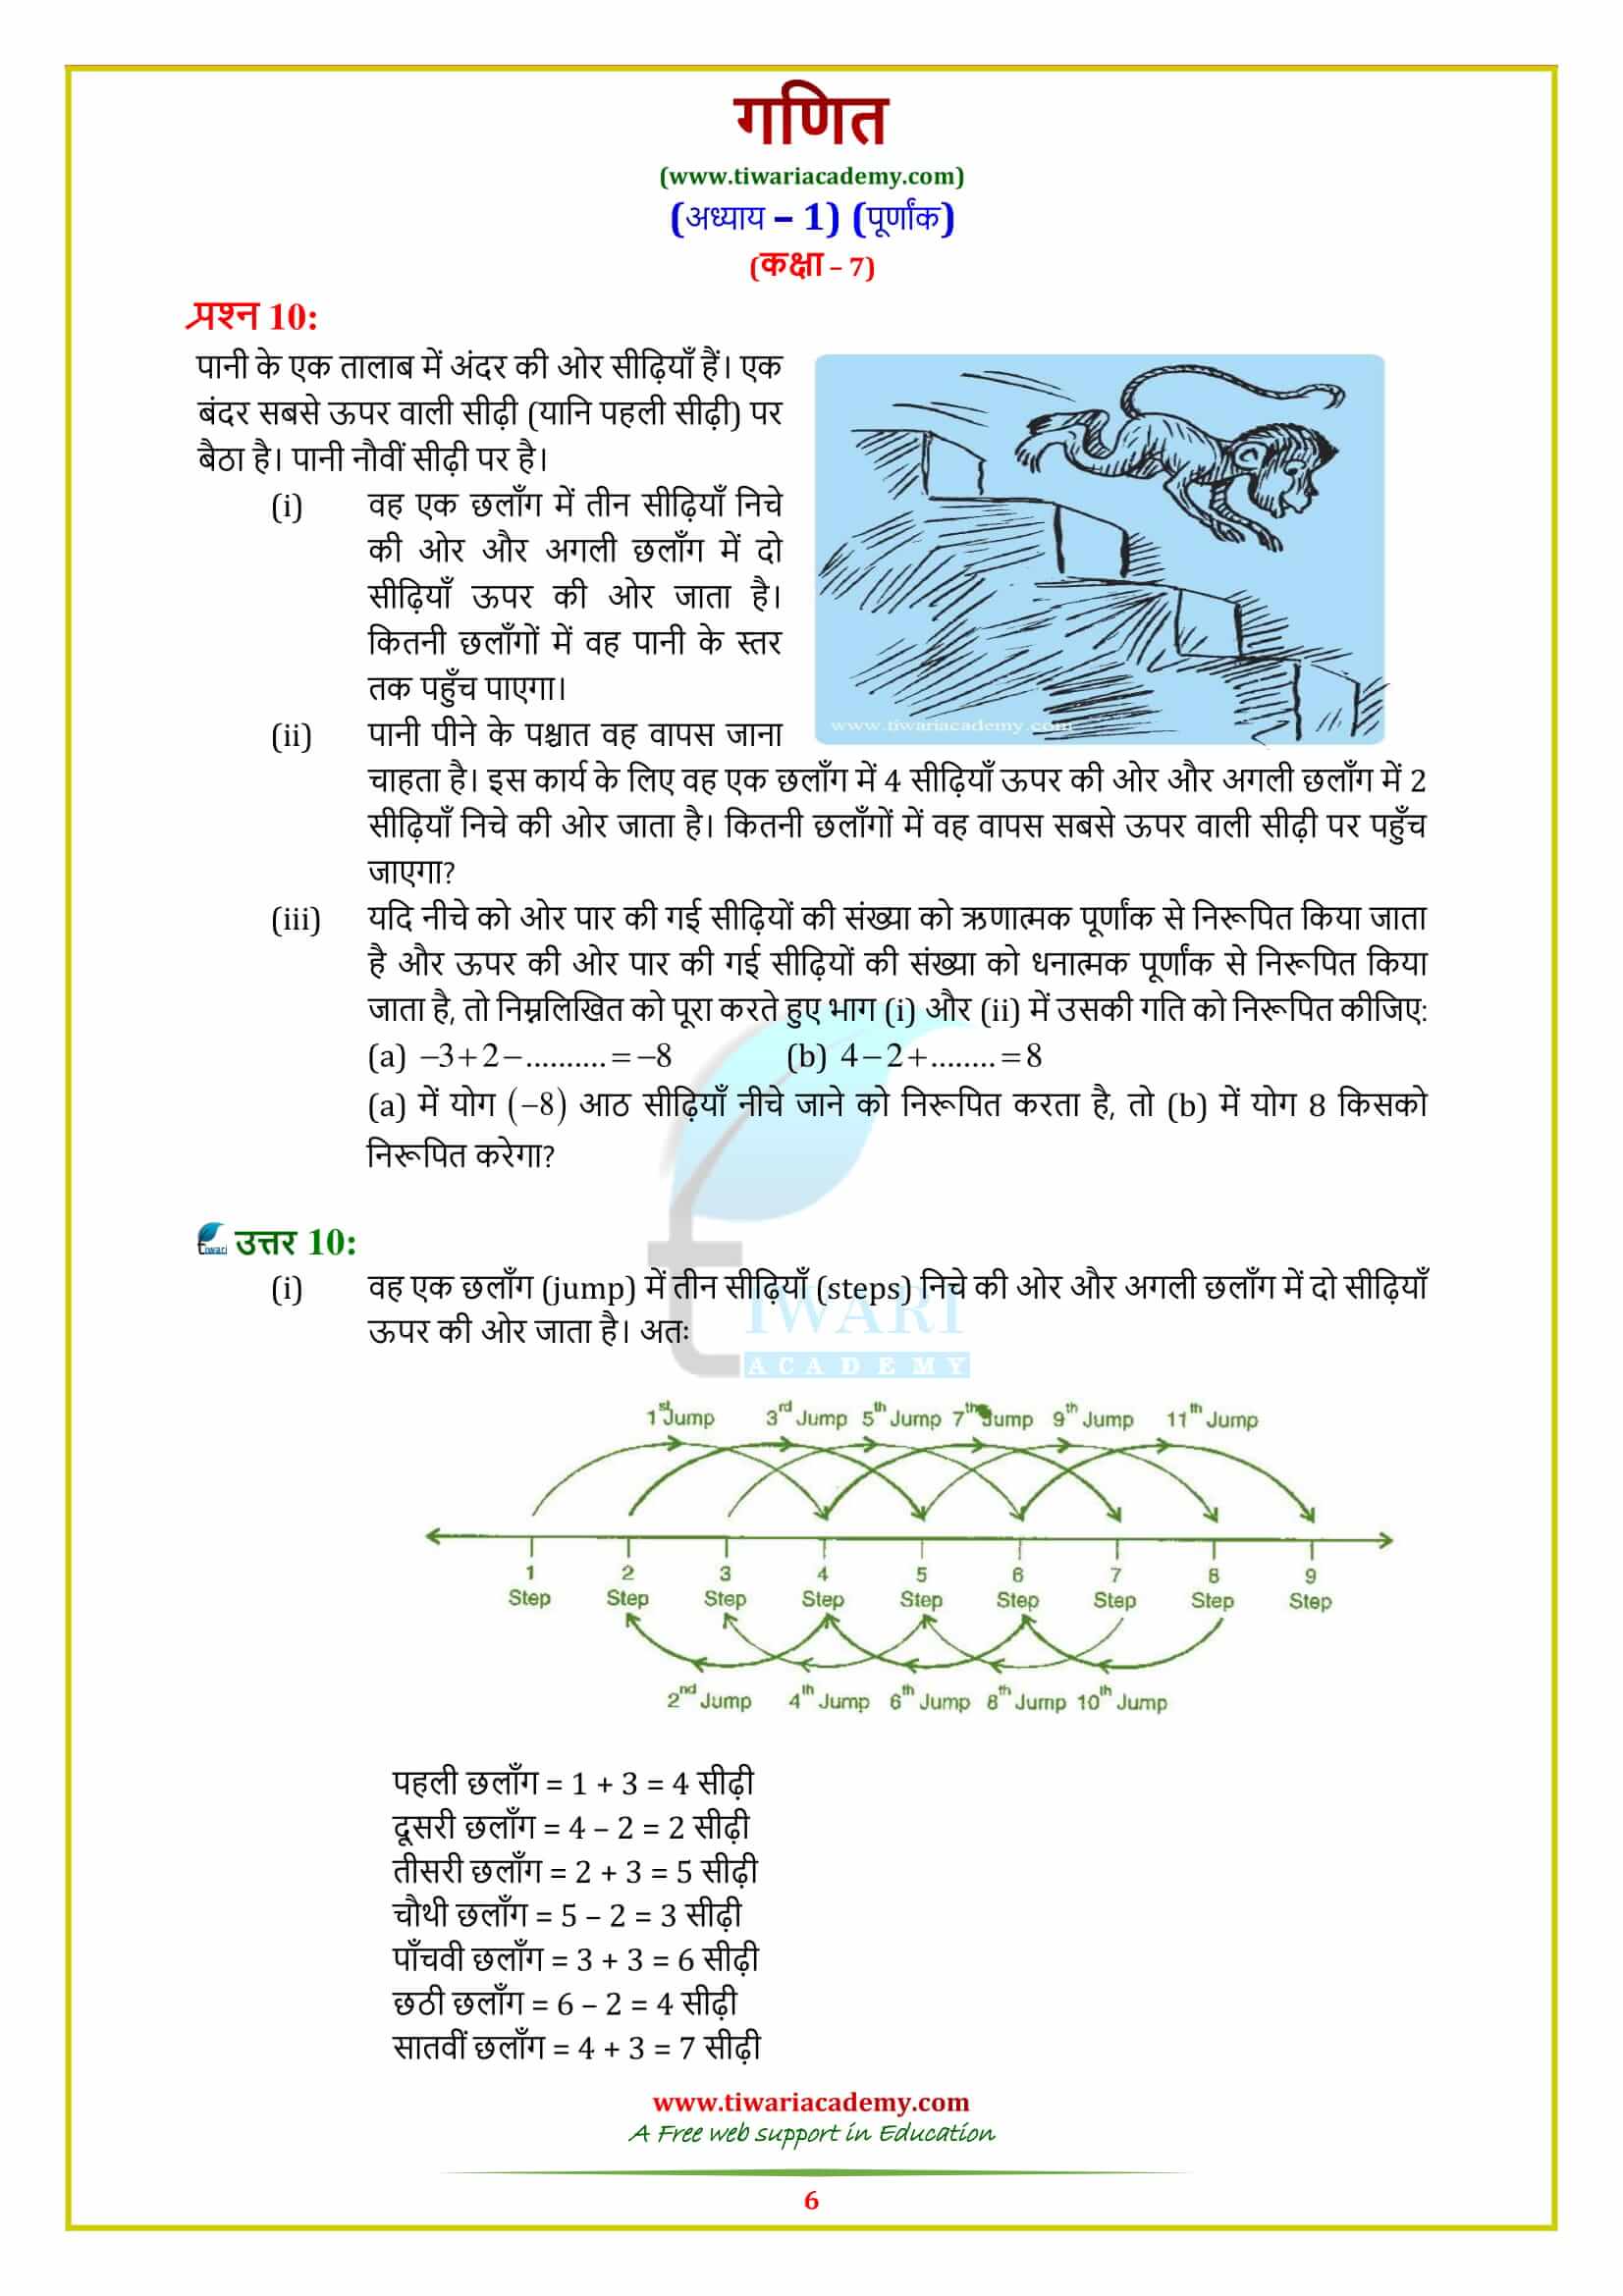 7 Maths exercise 1.1 solutions hindi me